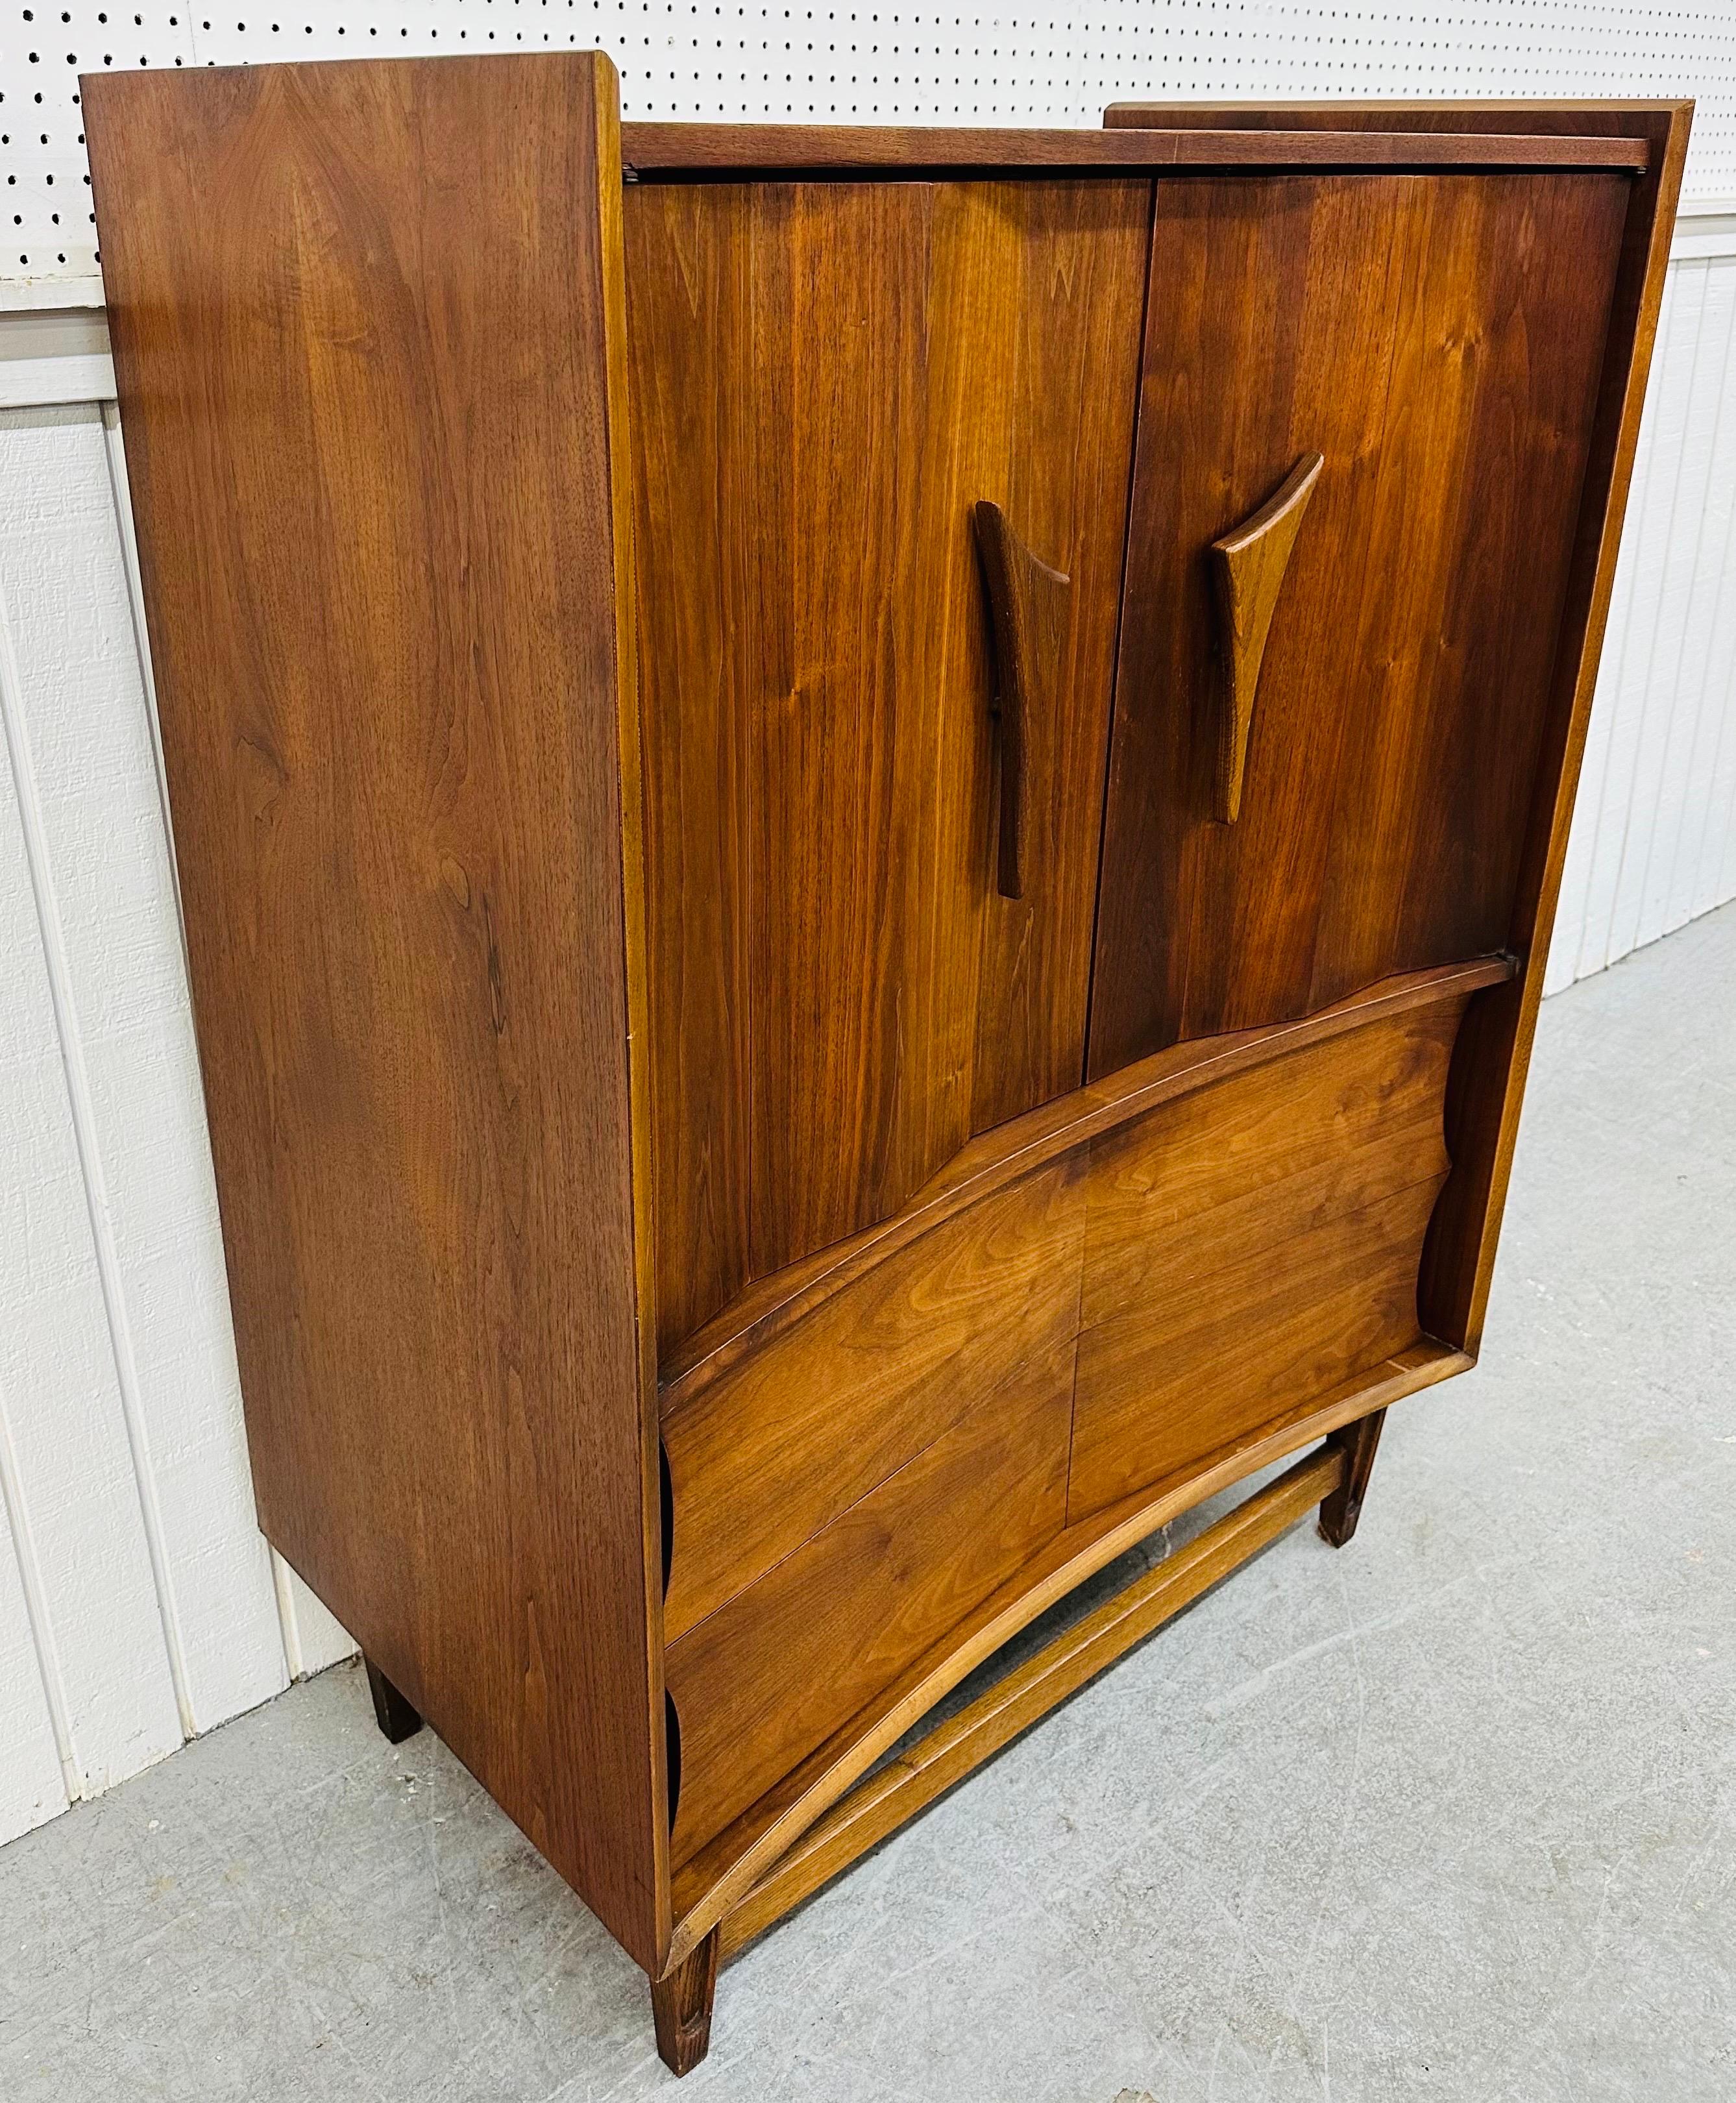 This listing is for a Mid-Century Modern Kagan Style Walnut High Chest. Featuring a straight line design, two doors with sculpted wooden pulls that open up to three hidden drawers, two larger drawers at the bottom, modern legs with a stretcher, and